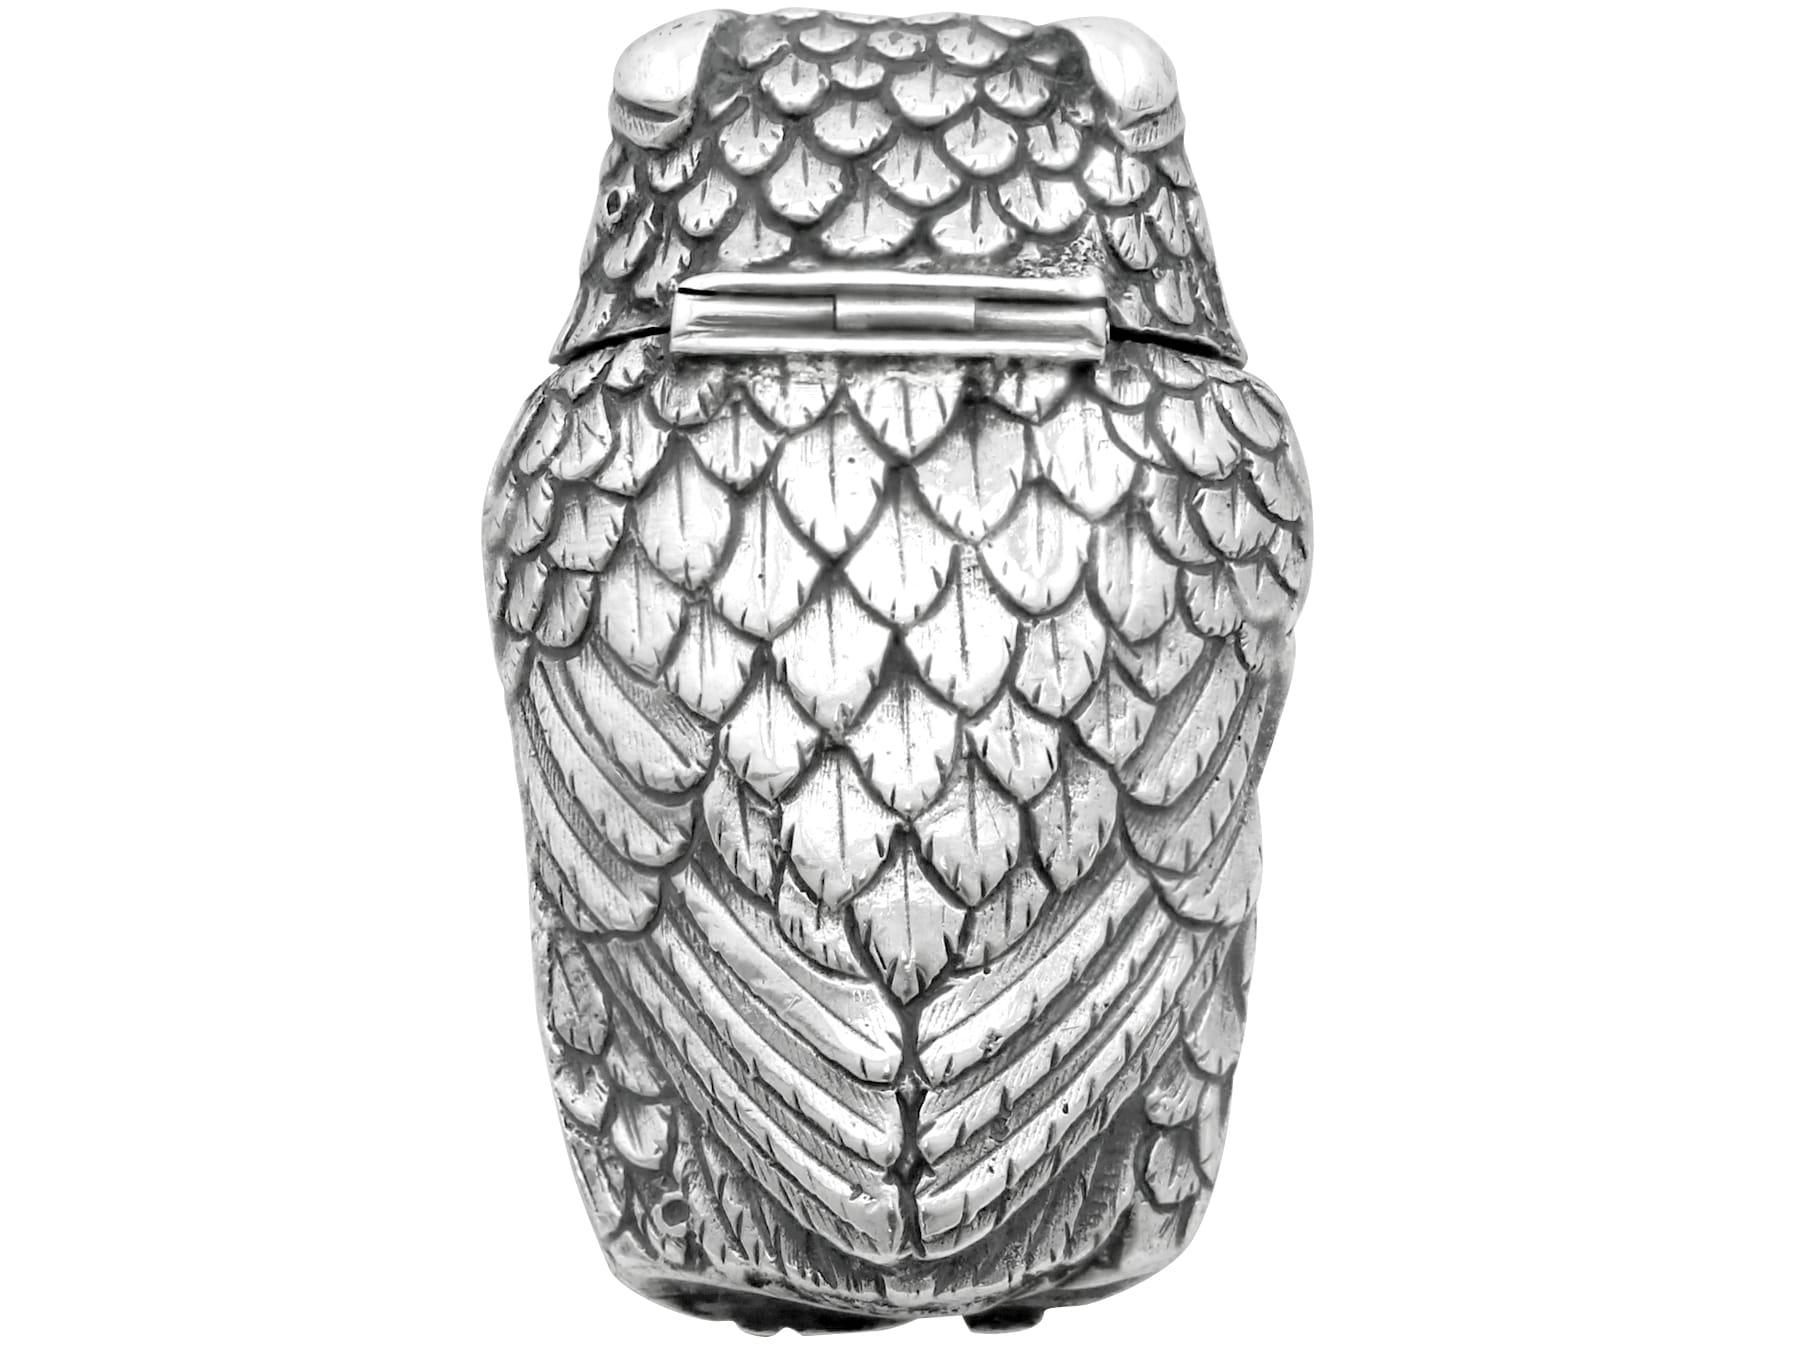 An exceptional, fine and impressive, antique Victorian English sterling silver vesta case modelled in the form of an owl; an addition to our ornamental silverware collection

This exceptional antique Victorian bsterling silver vesta case has been